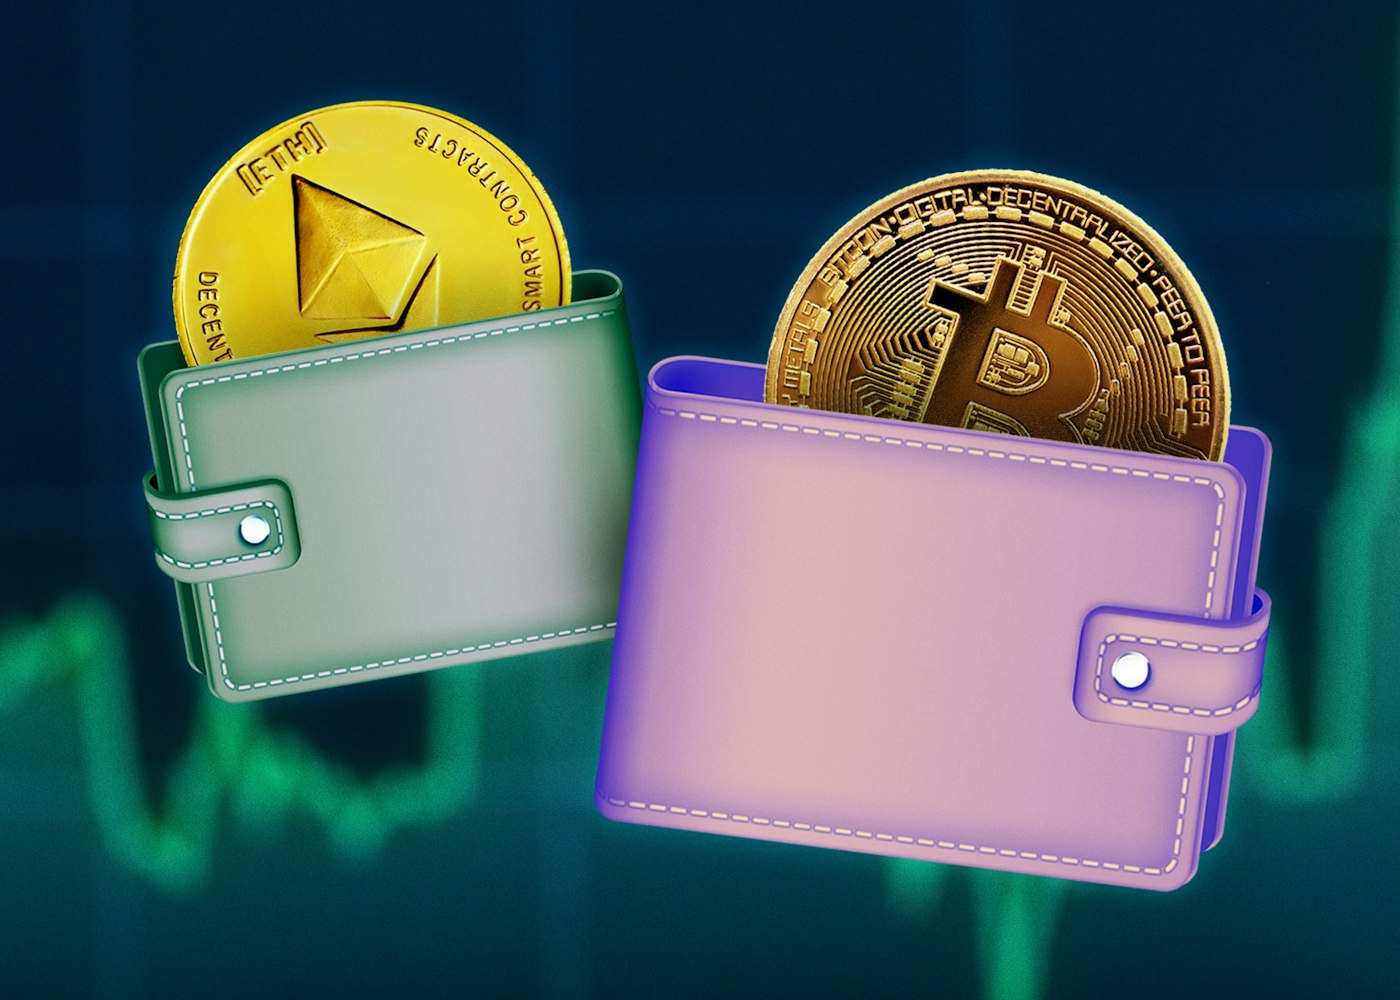 where to get bitrue crypto wallet